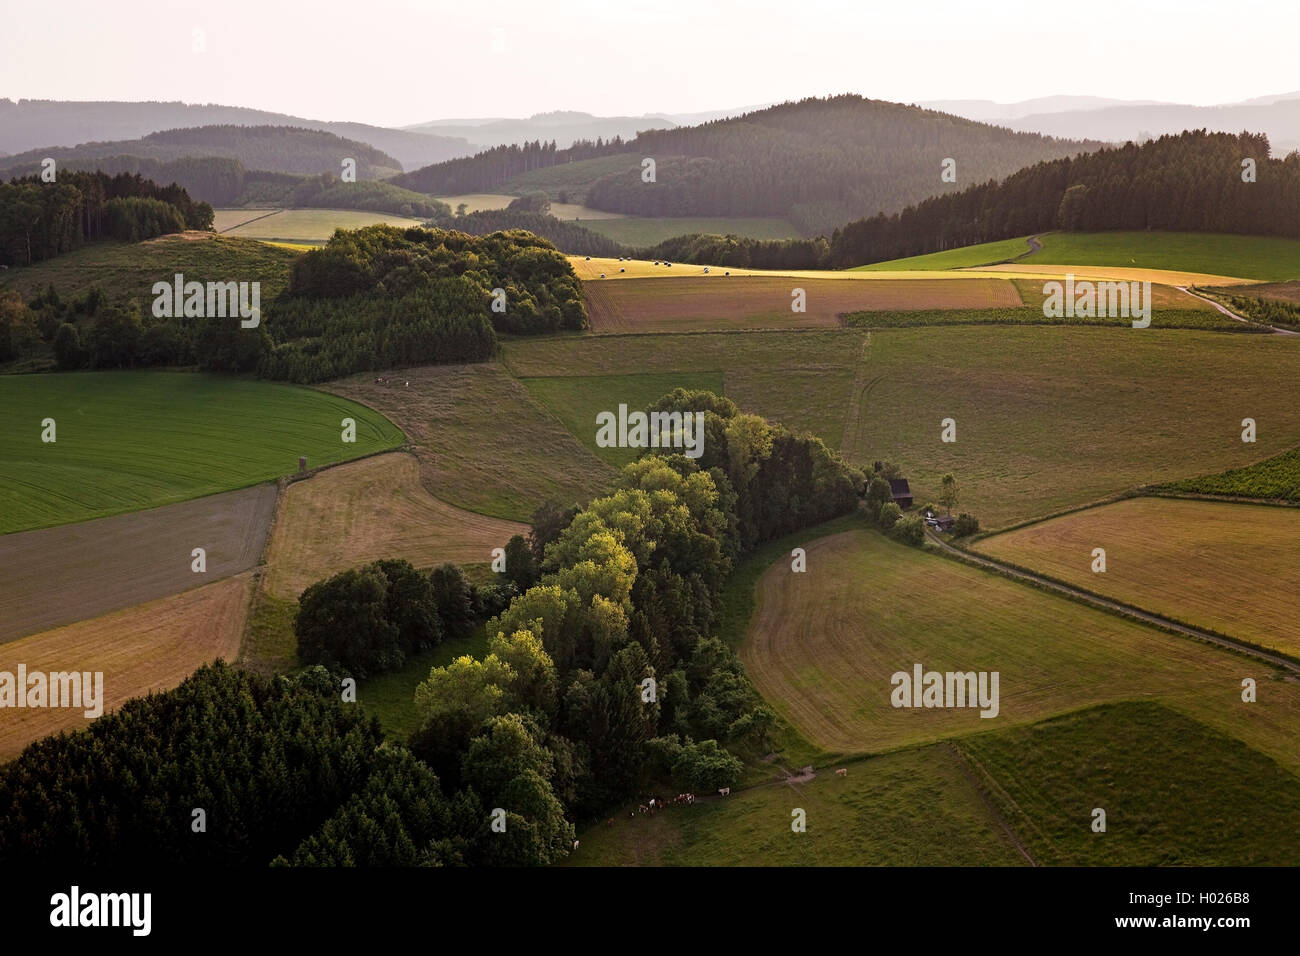 aerial view of hilly field and forest landscape near Menkhausen, Germany, North Rhine-Westphalia, Sauerland, Schmallenberg Stock Photo